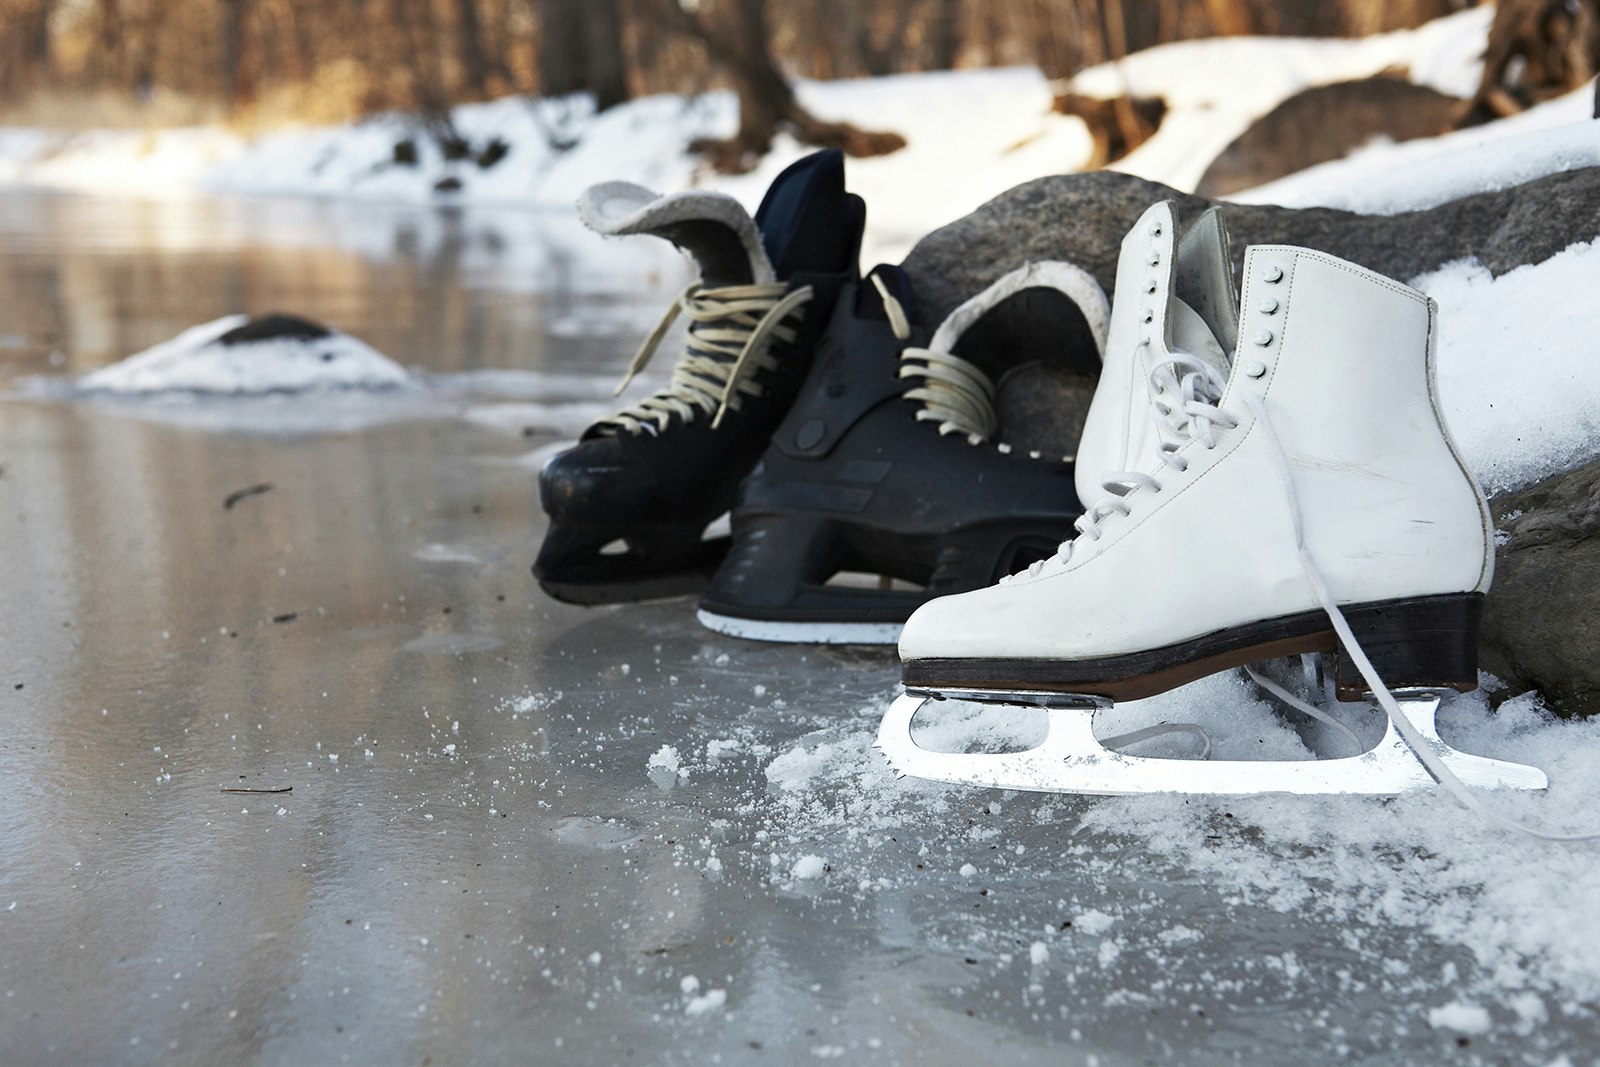 Hockey skates and figure skates together on a frozen pond in winter in Minneapolis 